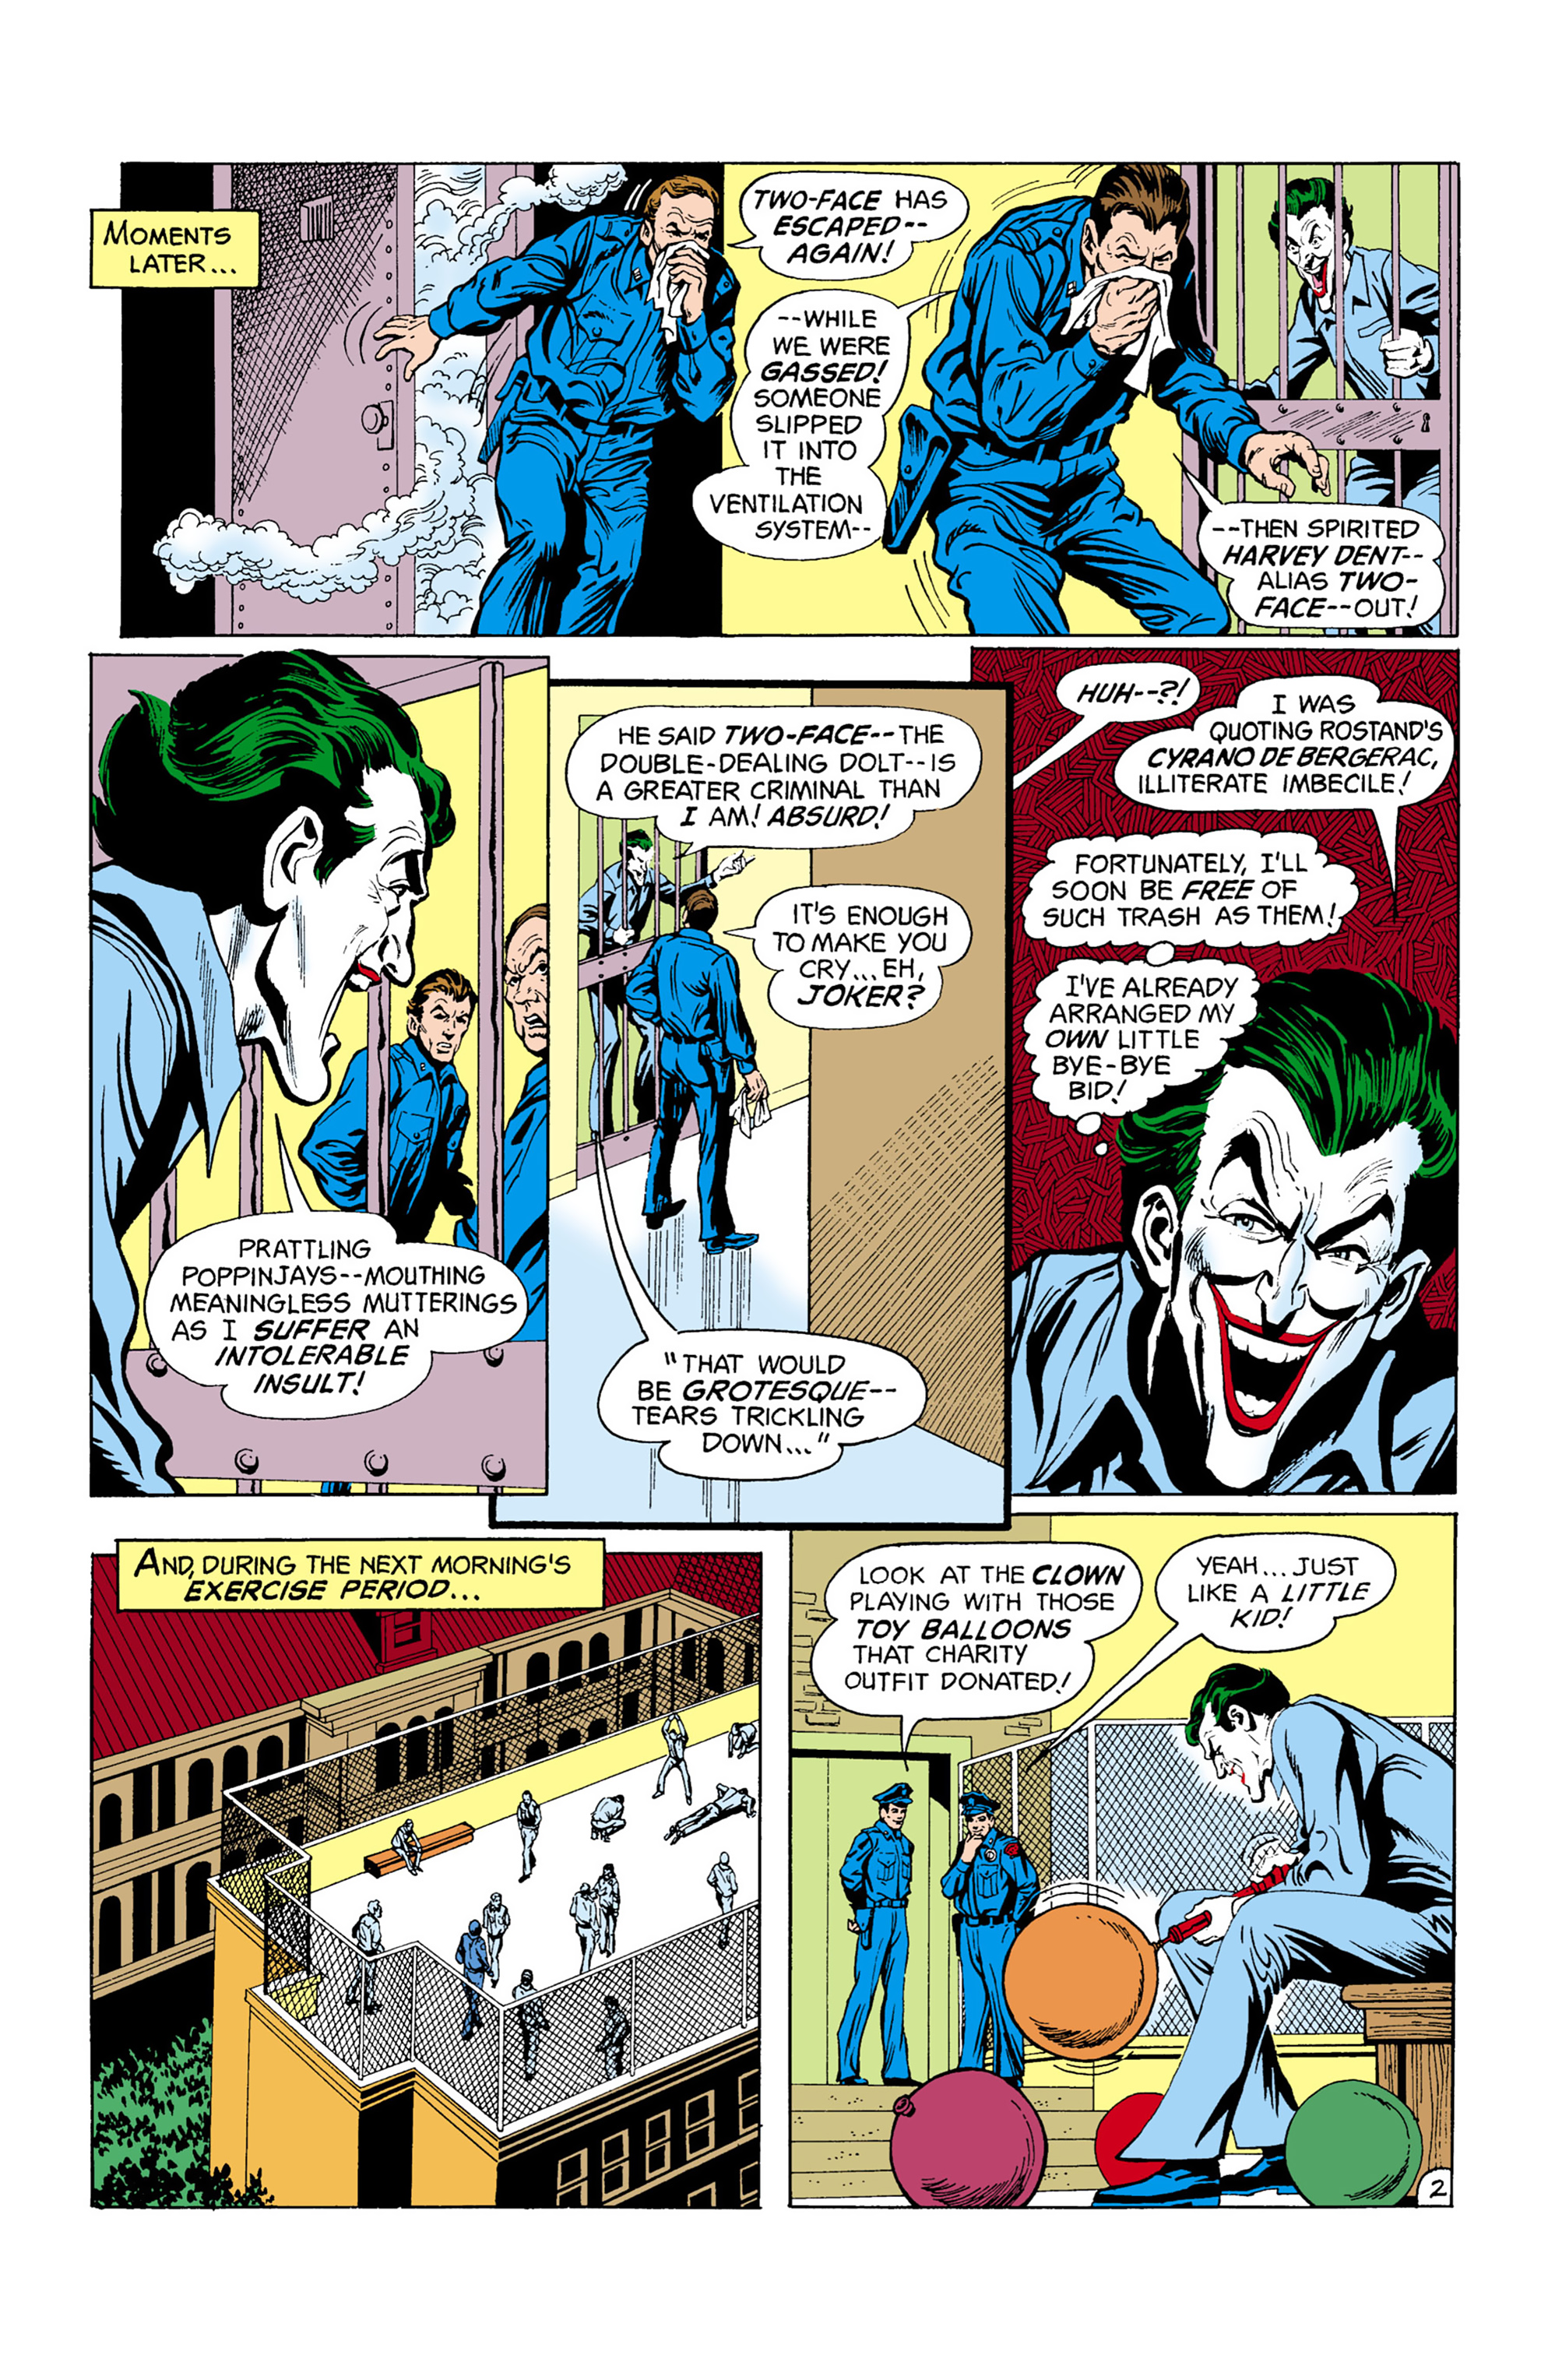 The Joker (1975-1976 + 2019): Chapter 1 - Page 3